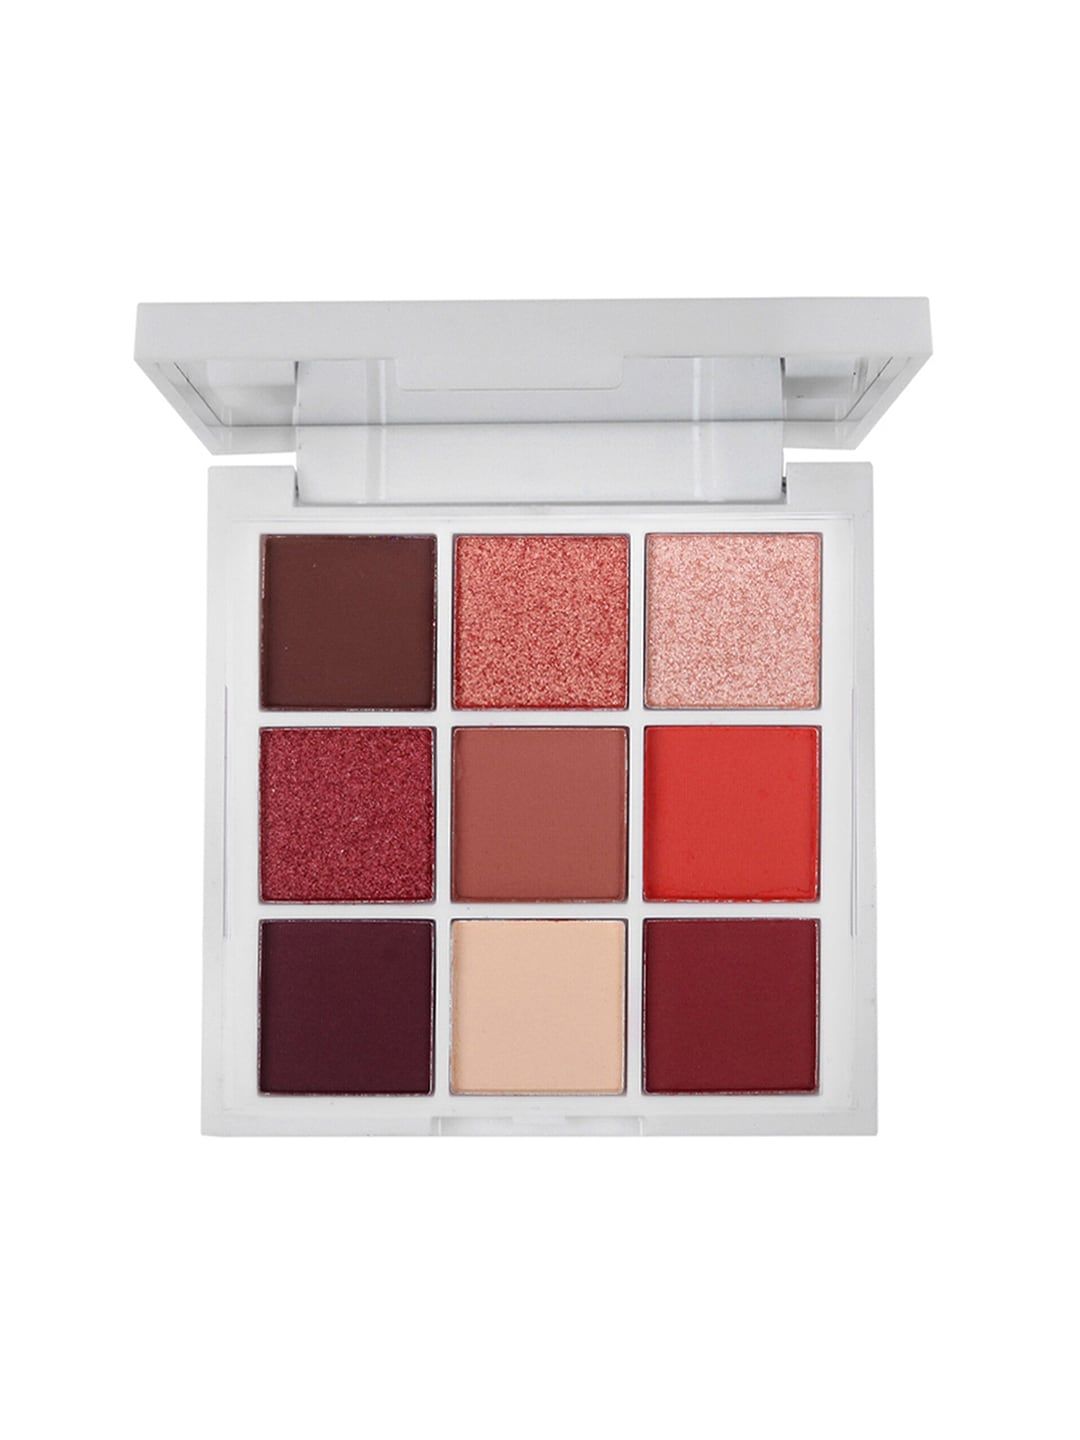 MARS Woman I Belong in your Purse Eyeshadow Palette - Oozing Swagger Price in India